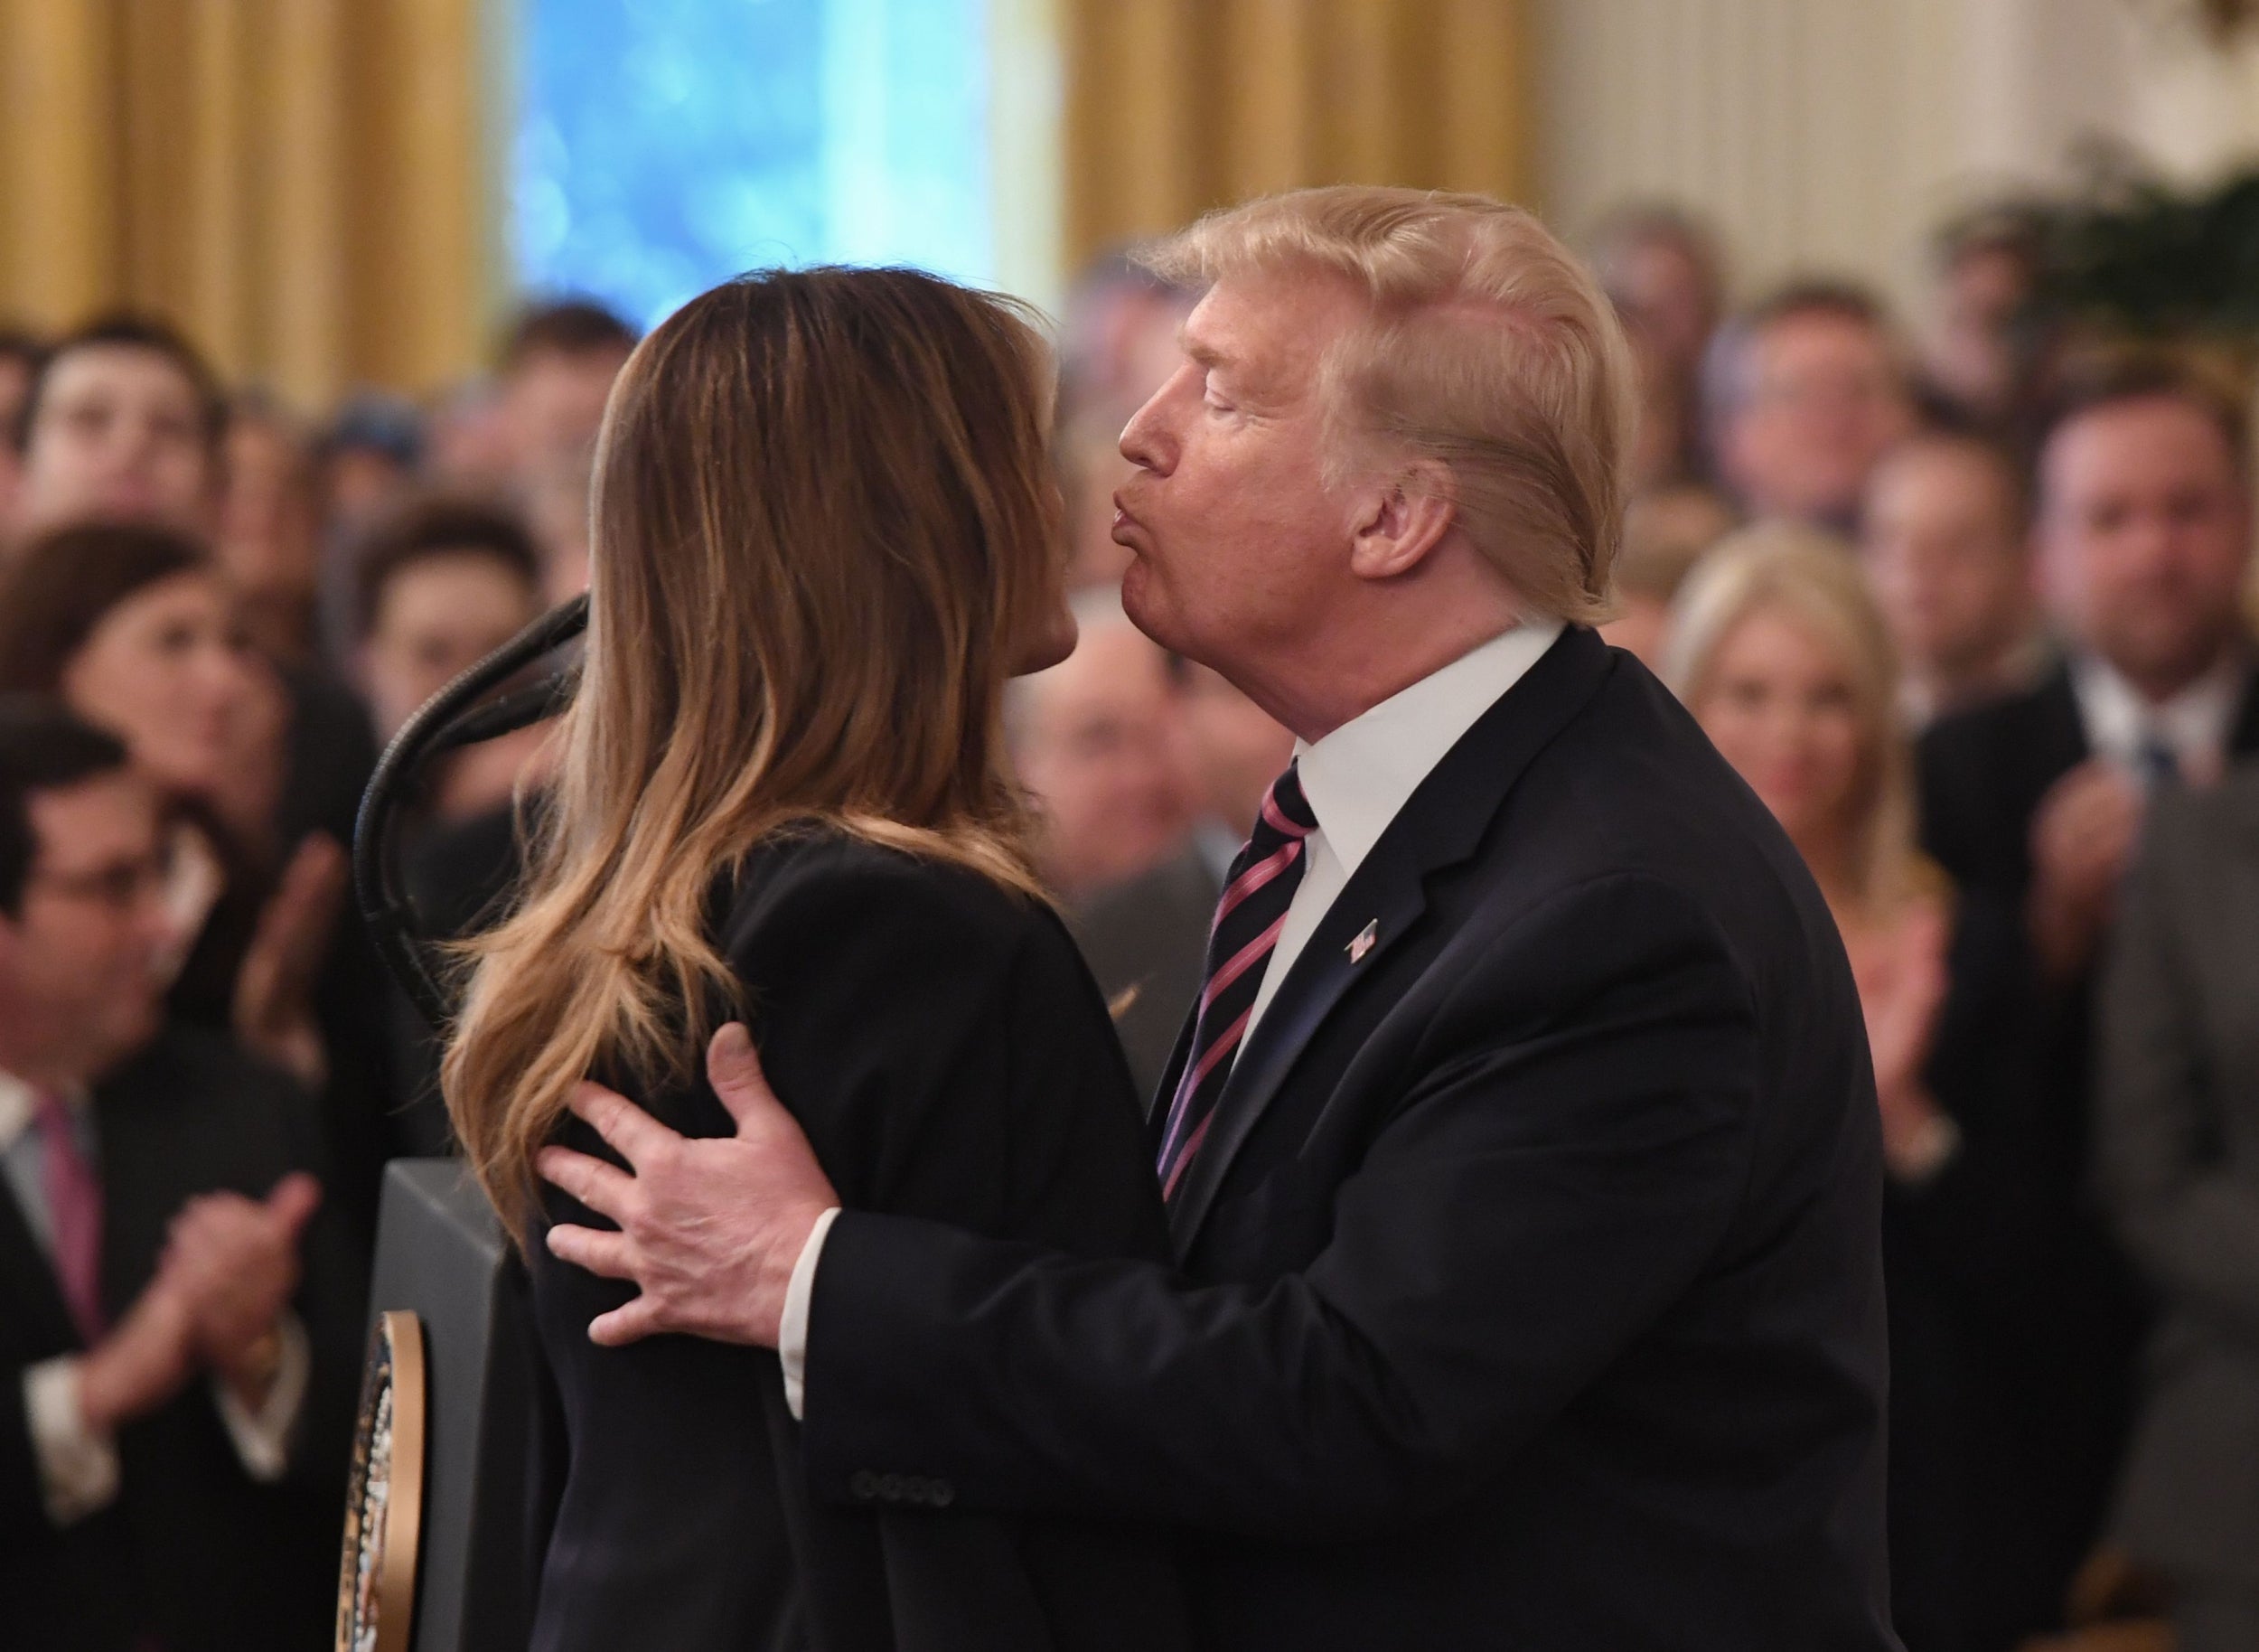 Donald Trump kisses the first lady after giving a speech in front of supporters following his Senate impeachment acquittal